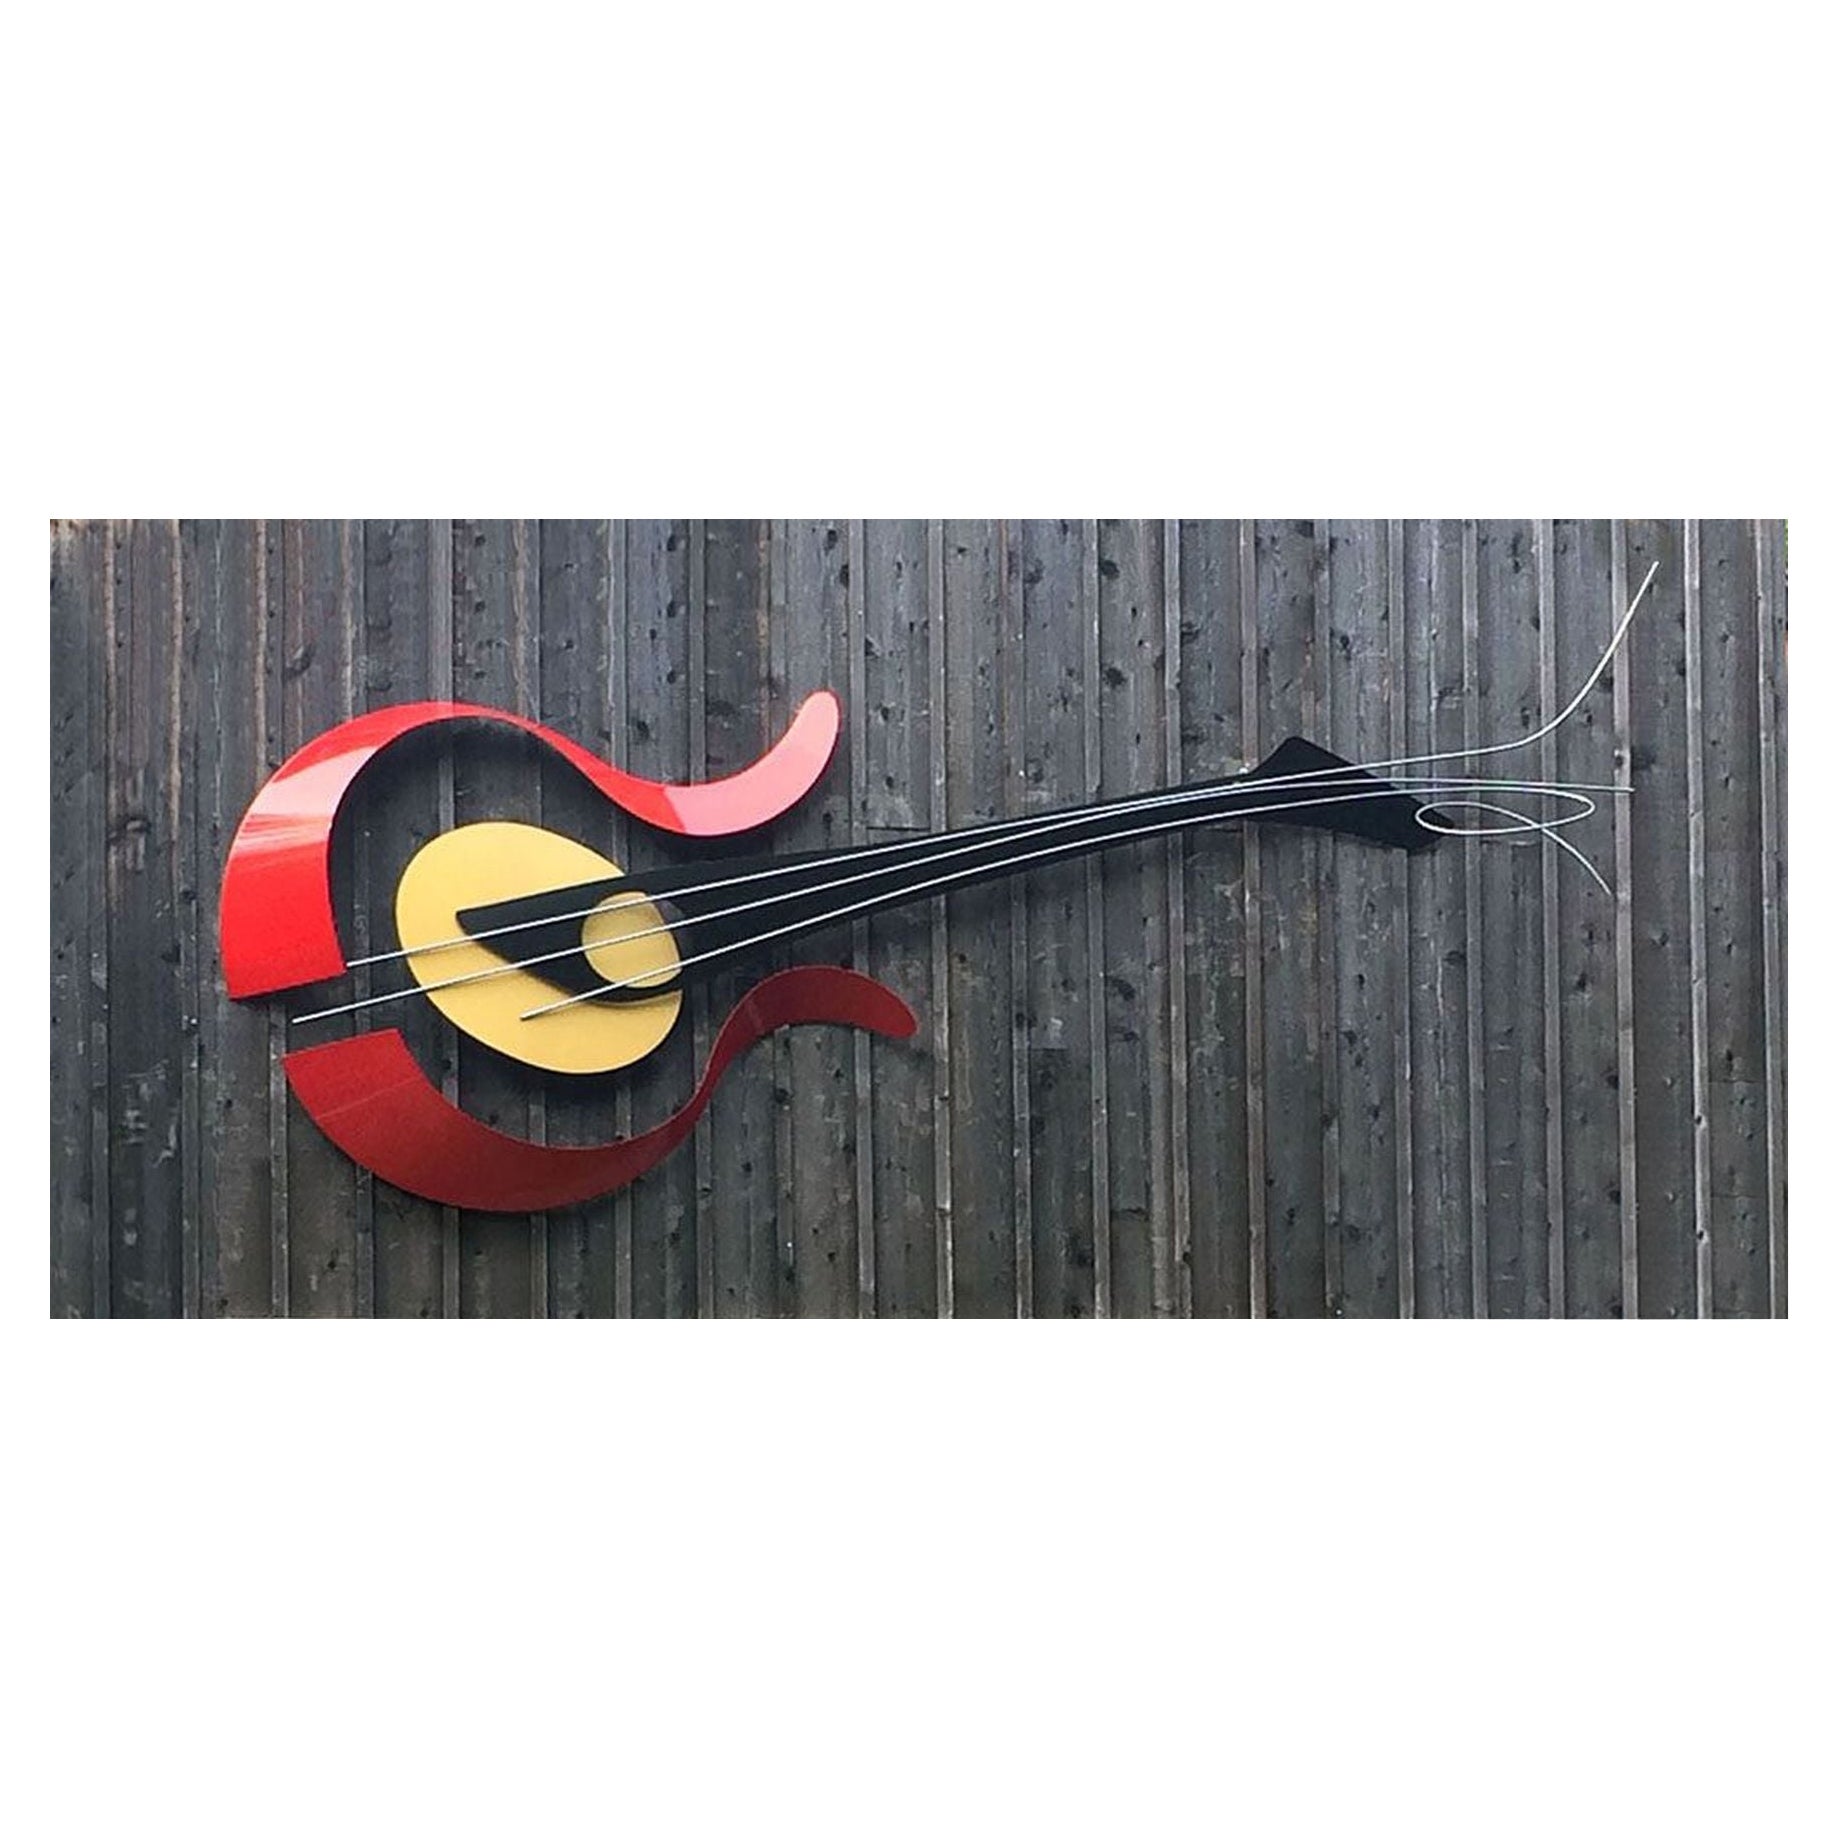 One of a Kind 1st Love Red Guitar Powder Coated Steel